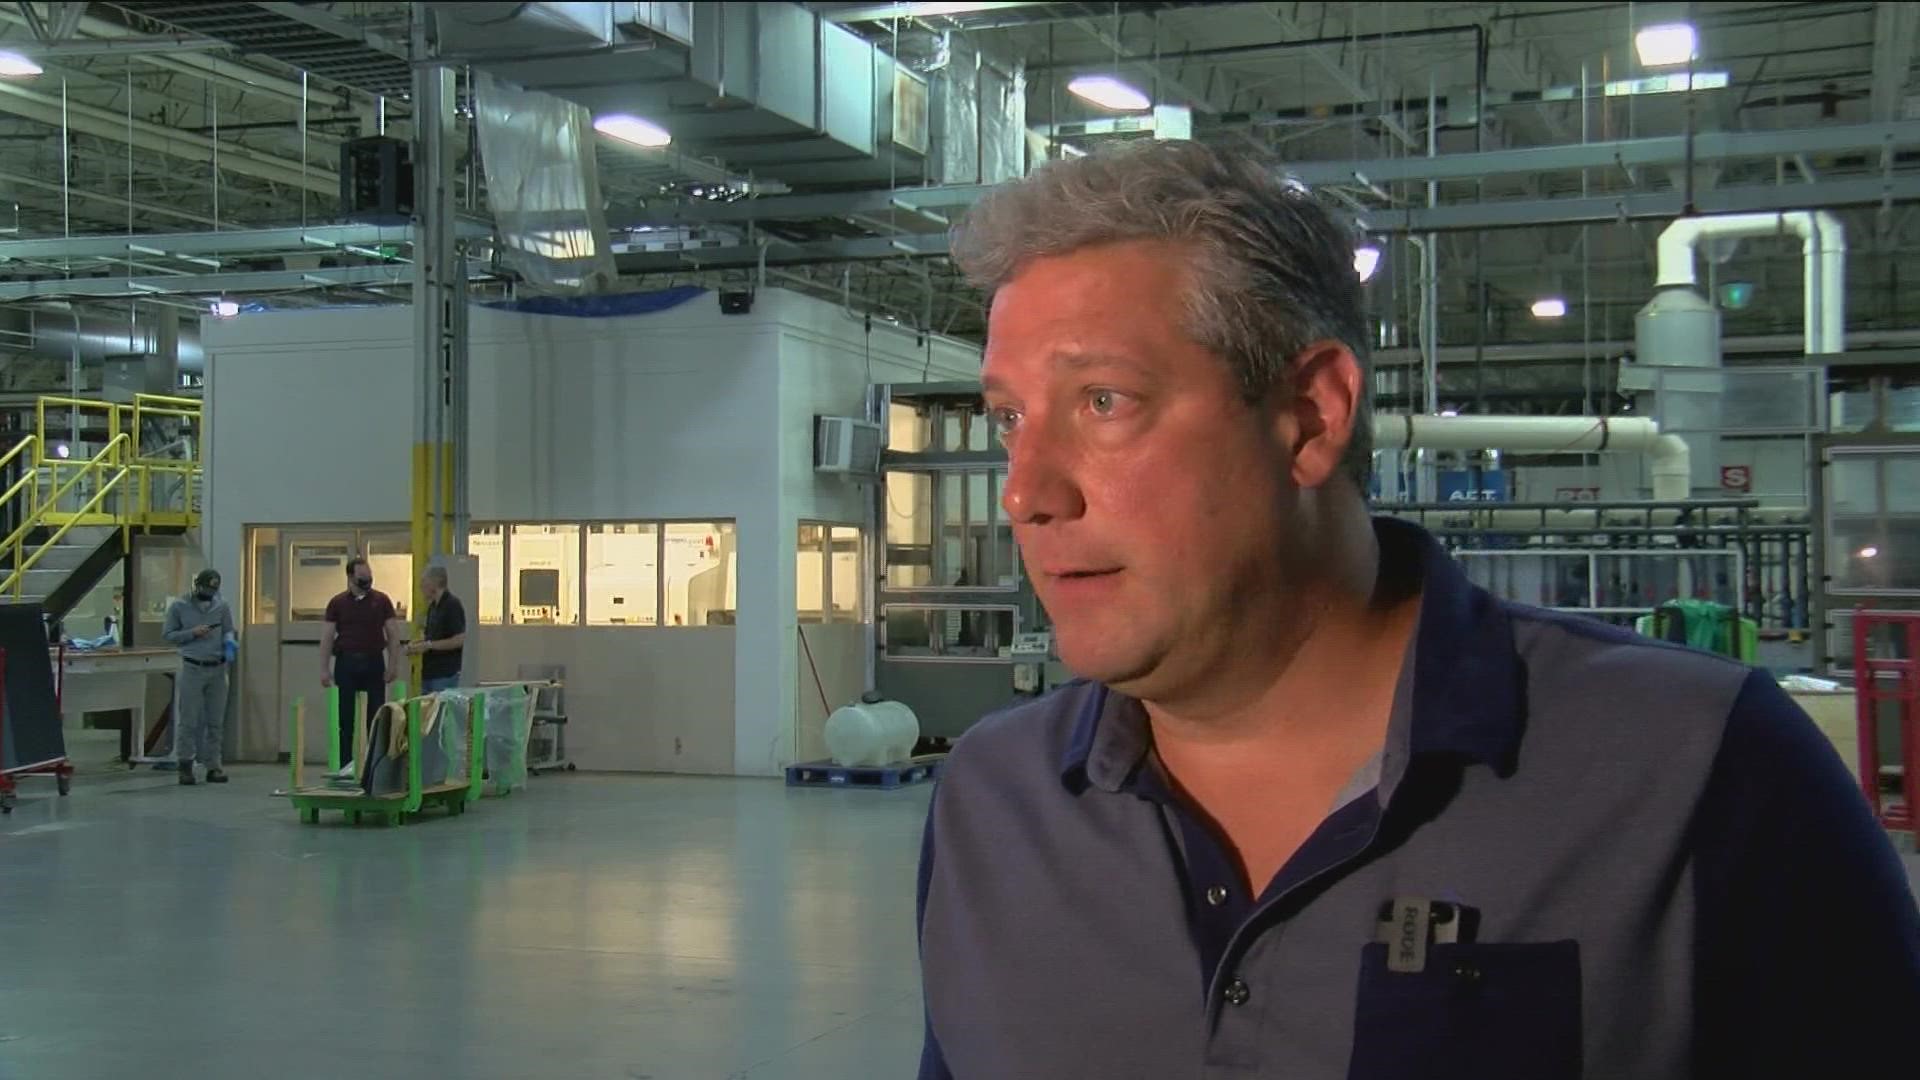 Ryan, who is running to represent Ohio in the U.S. Senate, visited a solar manufacturer in Wood County Wednesday.